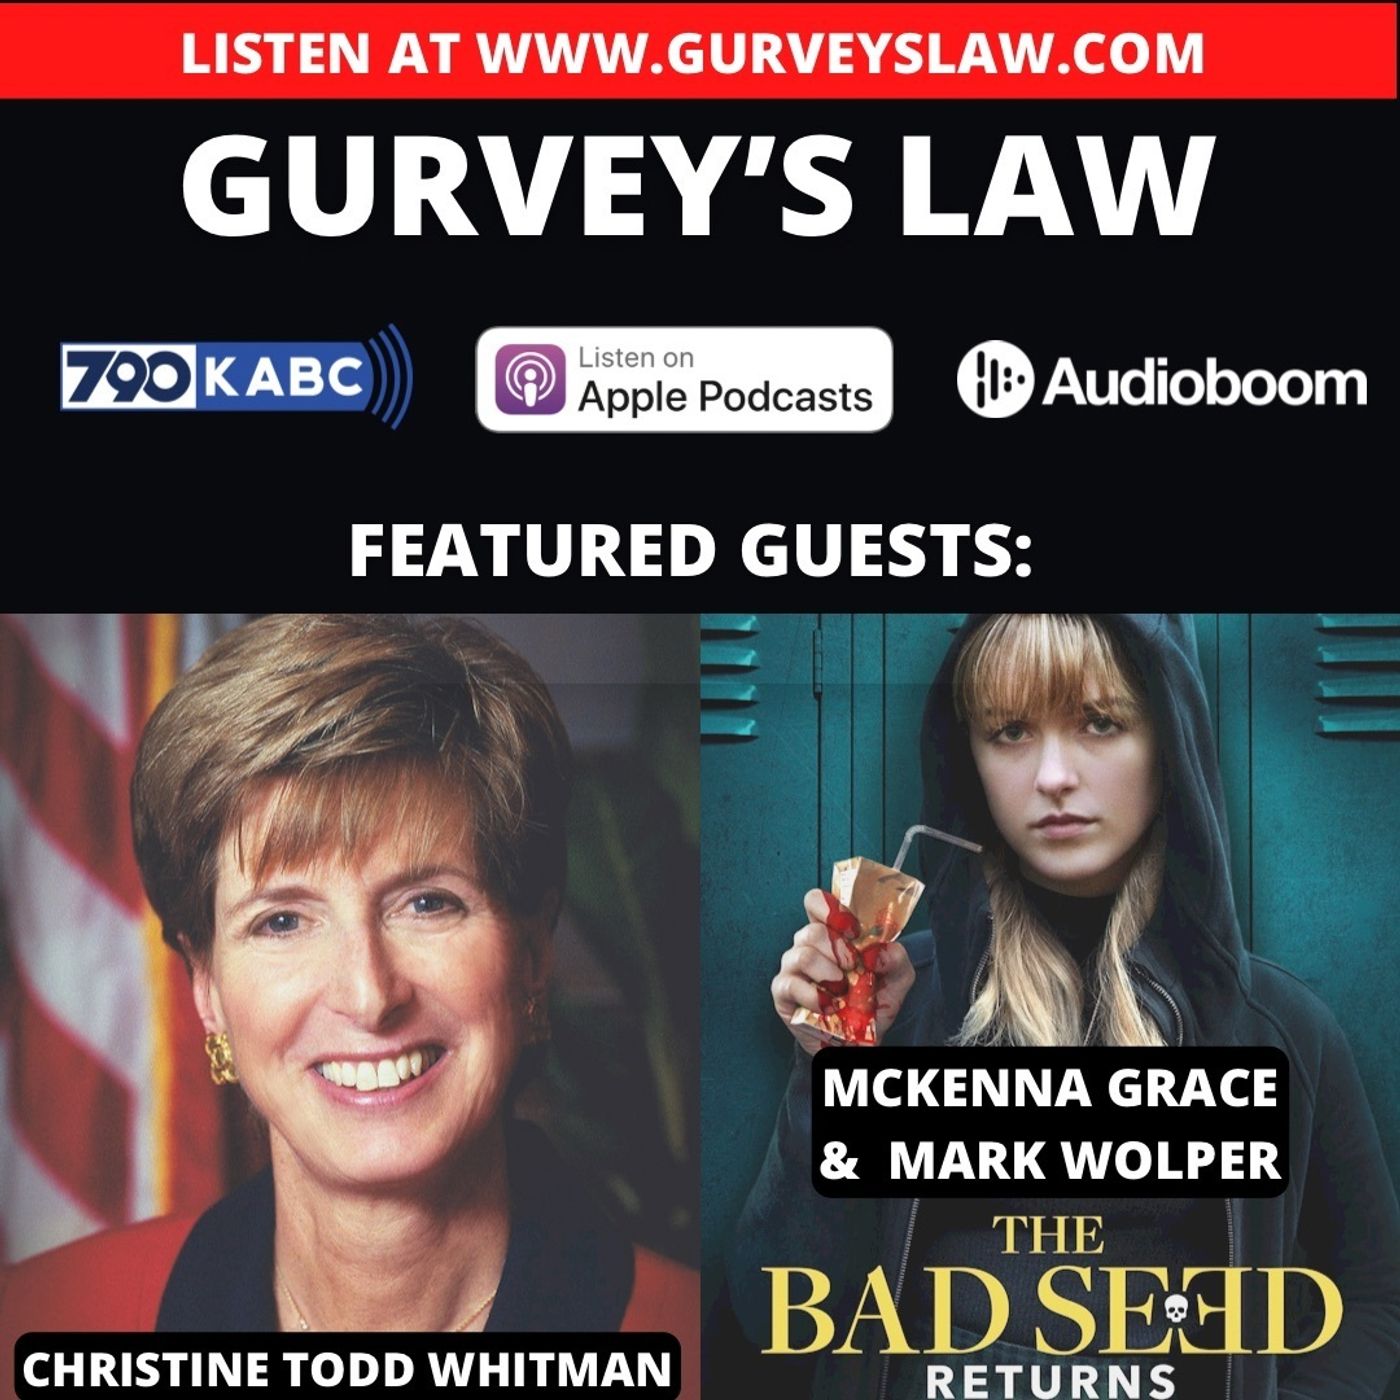 New Political Party and "The Bad Seed Returns" with former New Jersey governor Christine Todd Whitman, actress McKenna Grace and producer Mark Wolper with Host Alan Gurvey